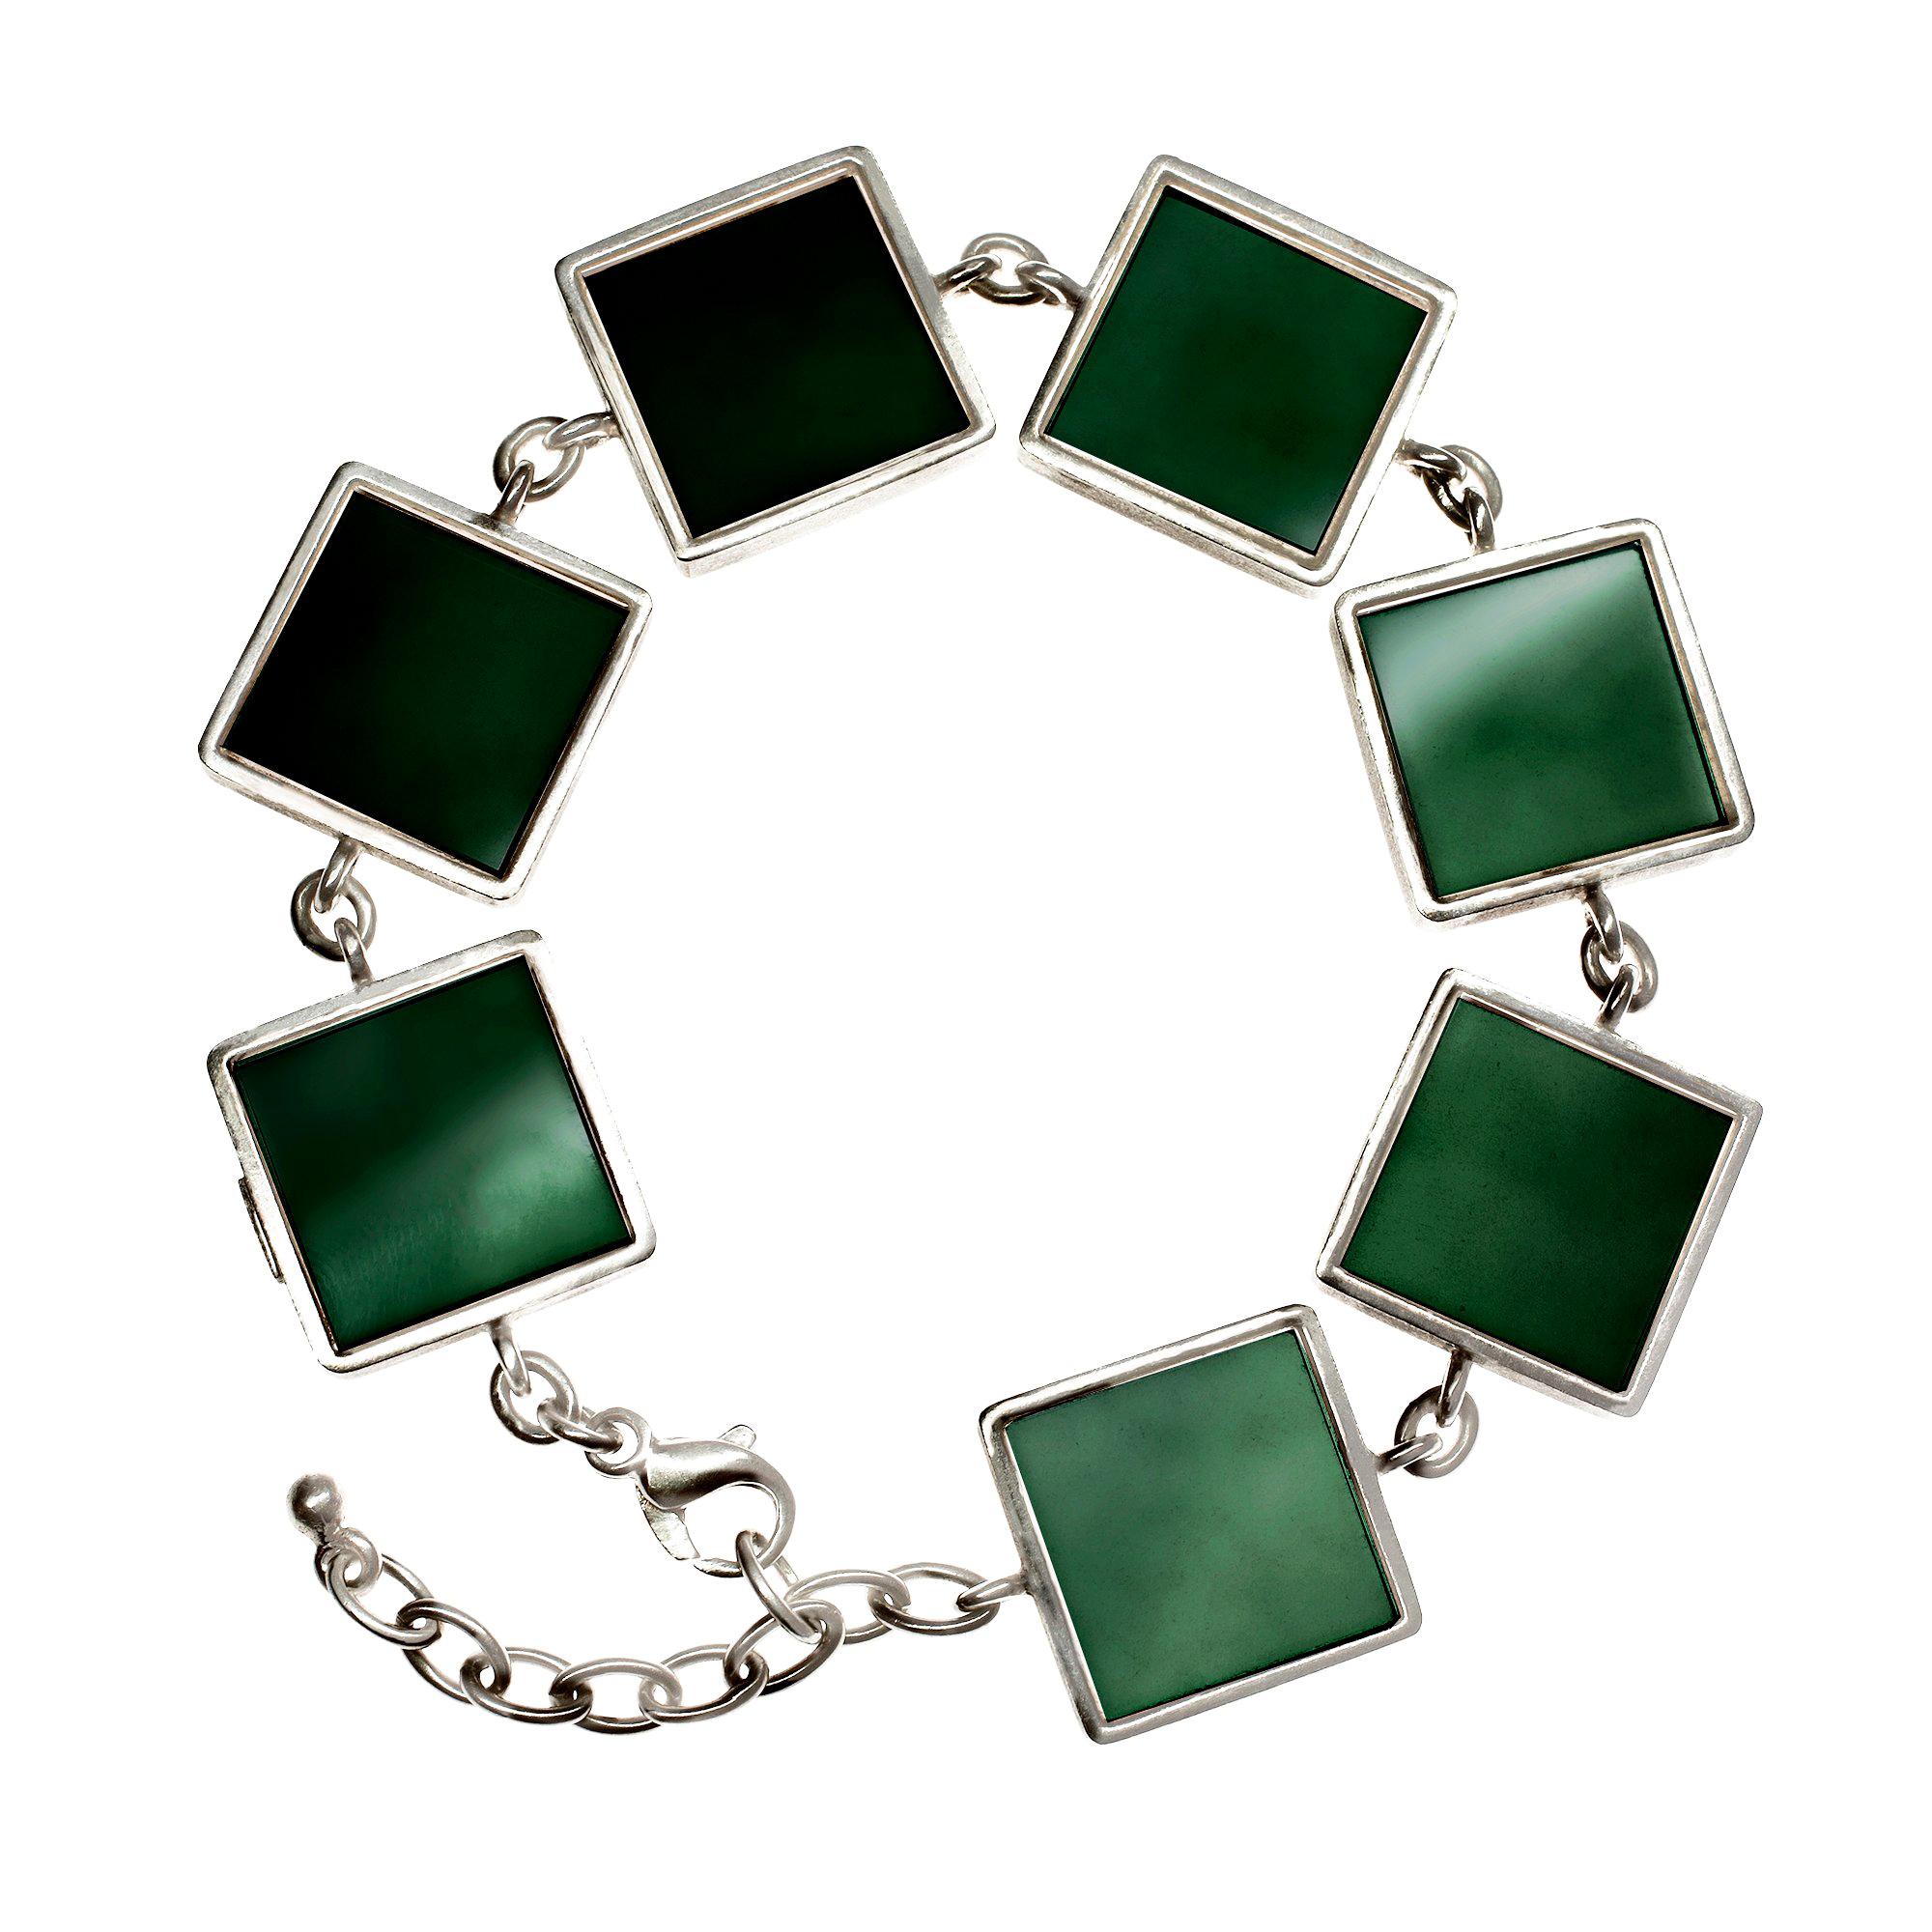 This Art Deco style bracelet is made of sterling silver and features seven dark and vivid green grown quartzes, each measuring 15x15x3 mm. It was featured in Harper's Bazaar UA and Vogue UA.

The bracelet is an eye-catching piece of jewelry that has